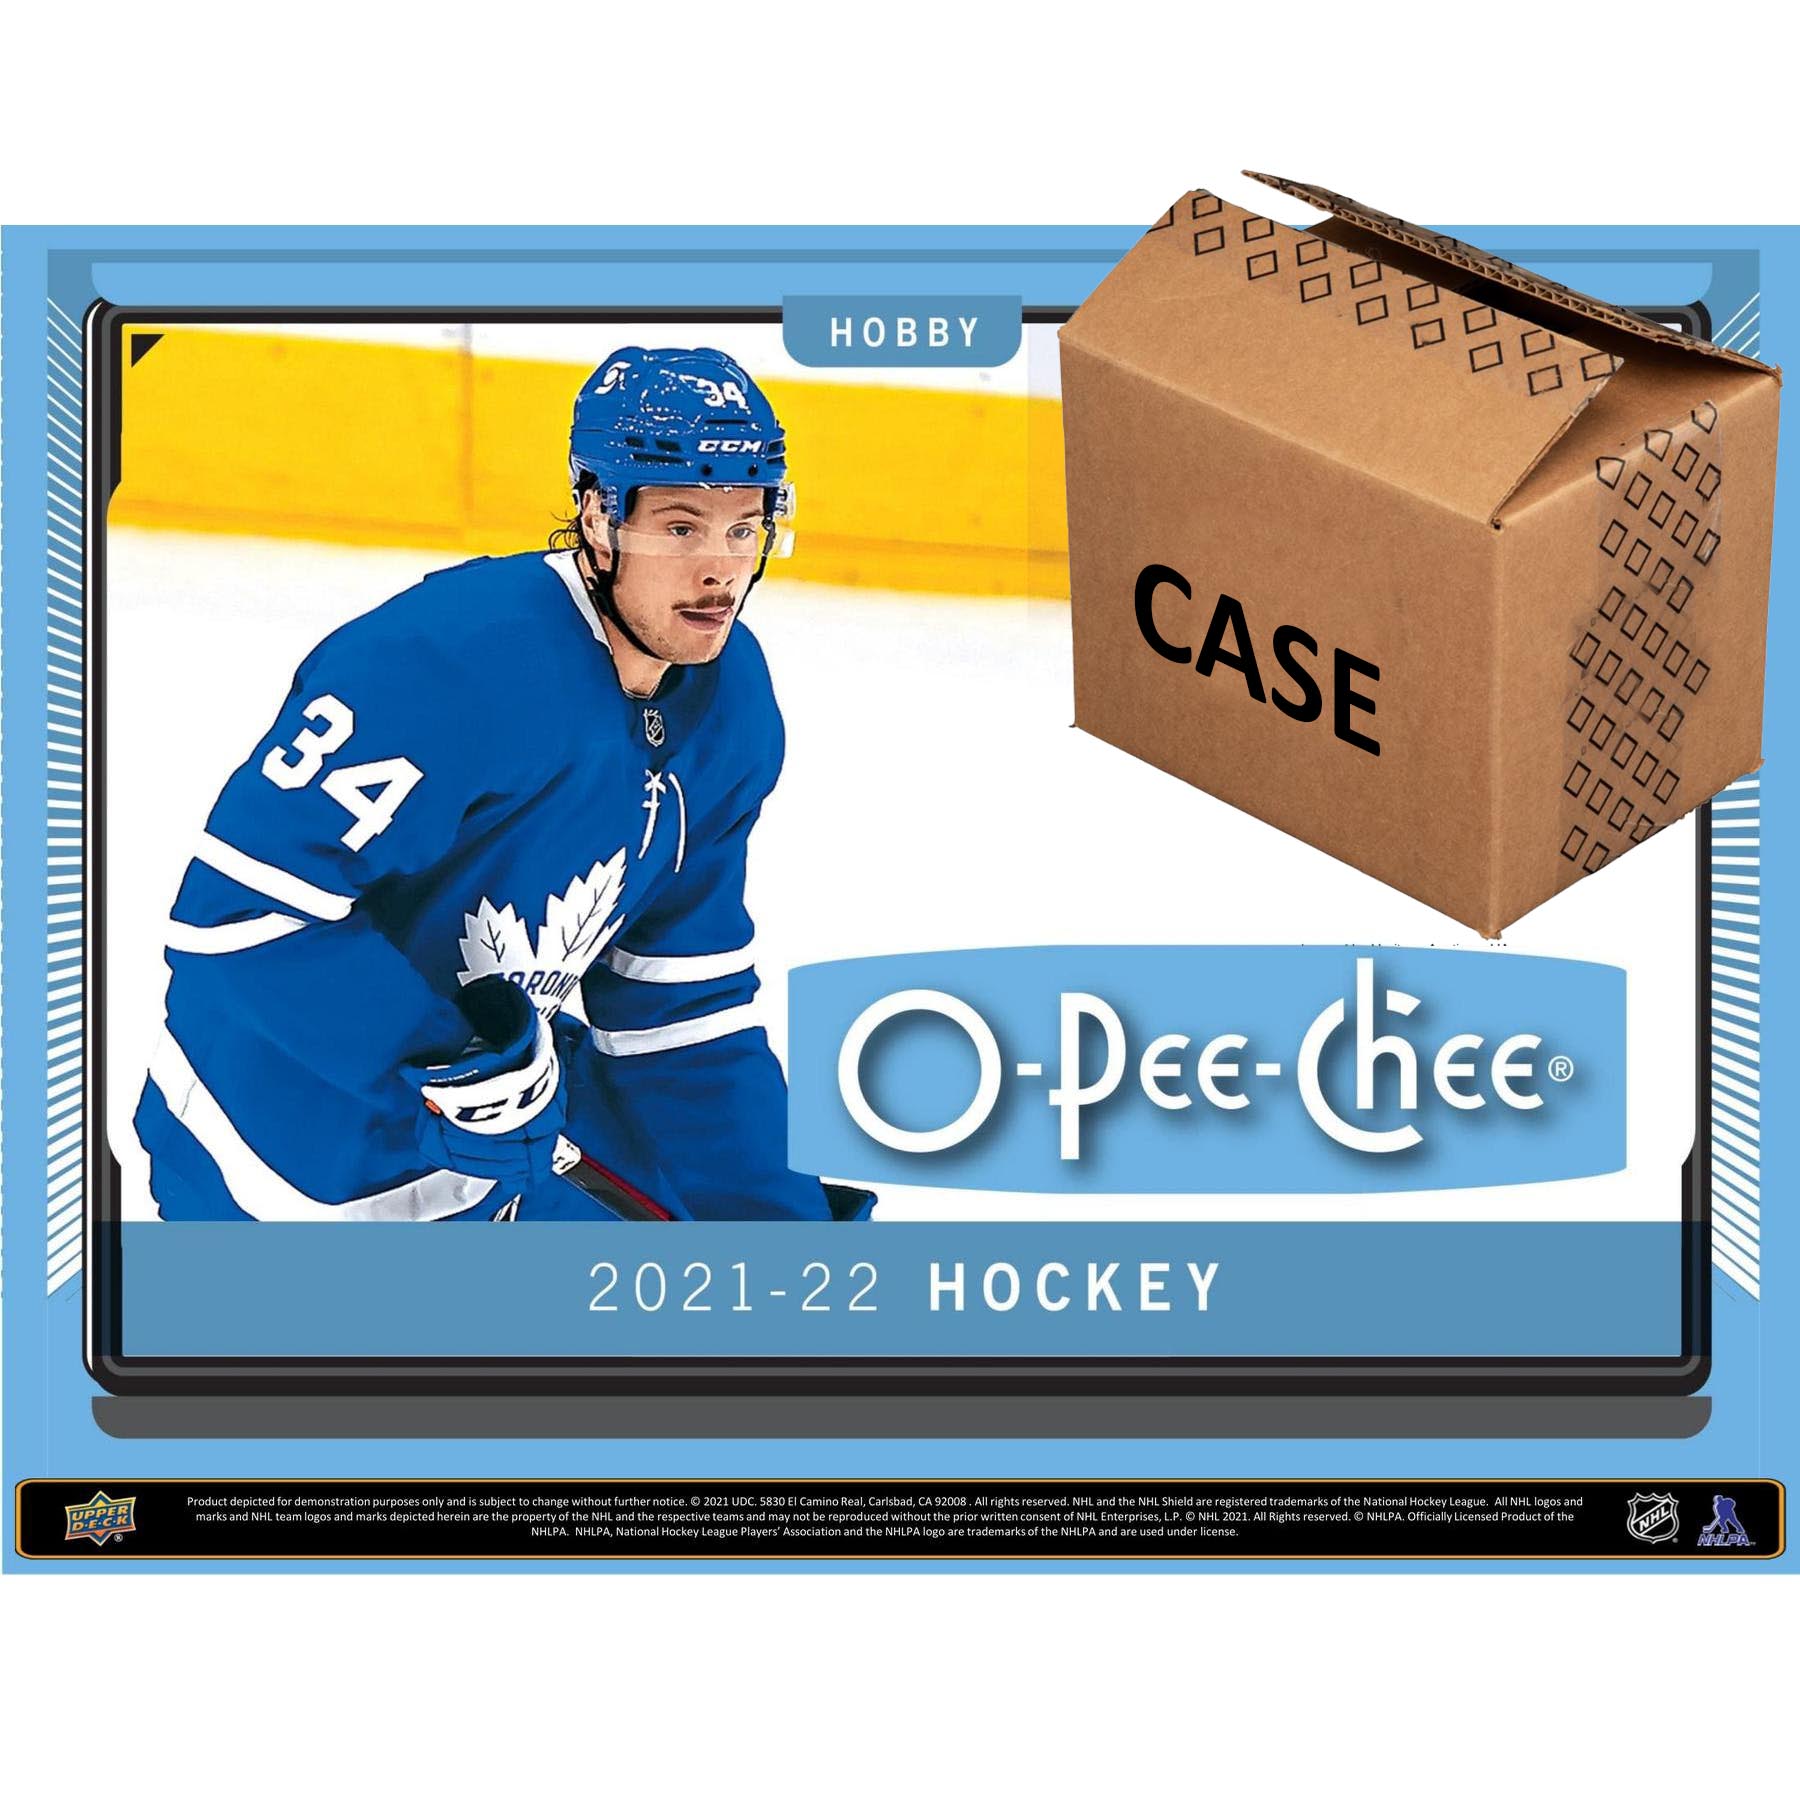 2021-22 Upper Deck O-Pee-Chee Hockey Hobby Case (Case of 16 Boxes)( Pre-Order) - Miraj Trading